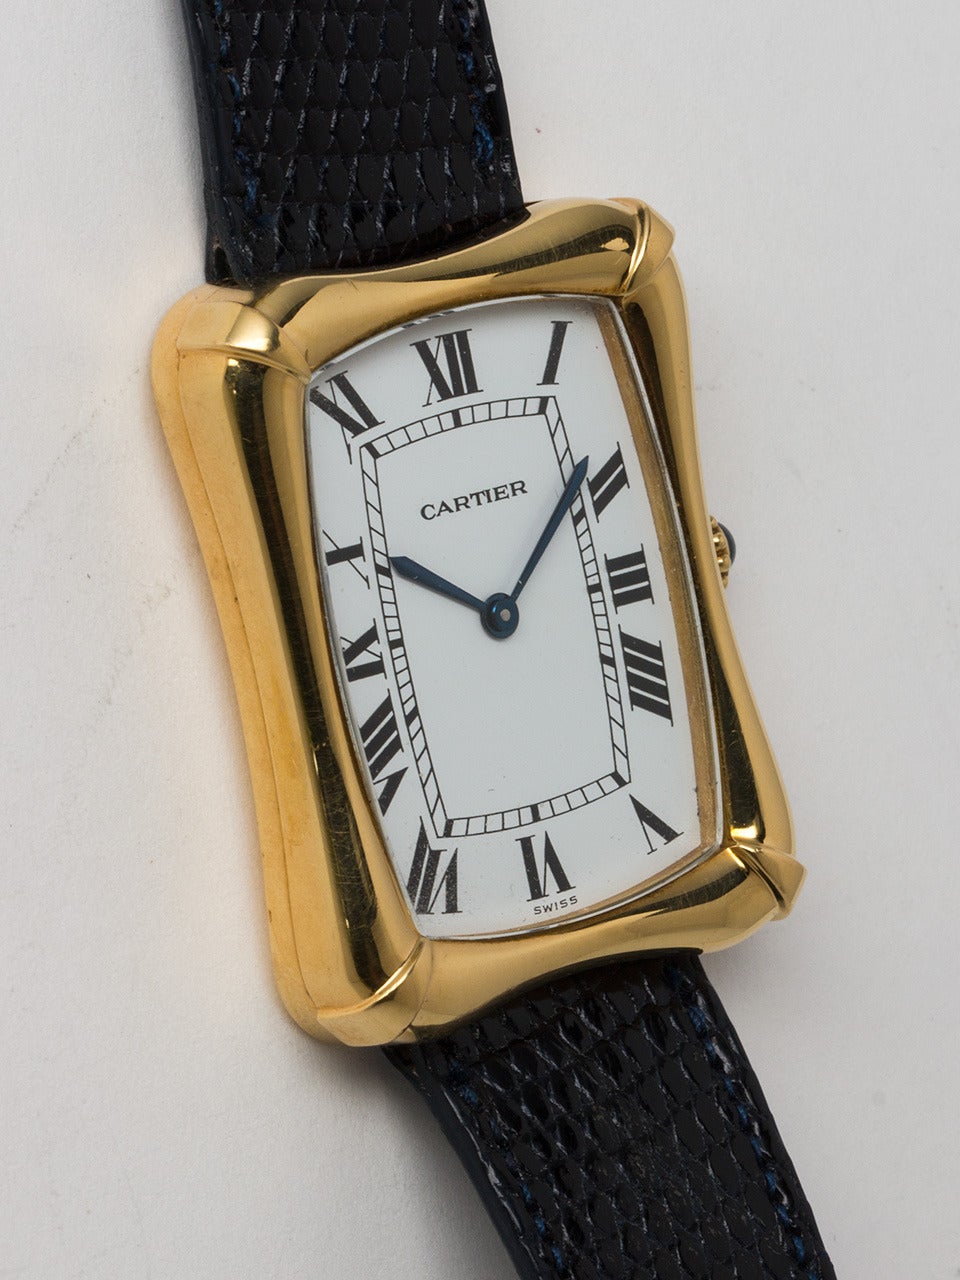 Cartier Yellow Gold Bamboo Tank Wristwatch circa 1973. Large and very distinctive man's model introduced in 1973, measuring 28 x 36mm and 7mm thick. Exceptional condition example with great sculpted design. Very clean original white dial with